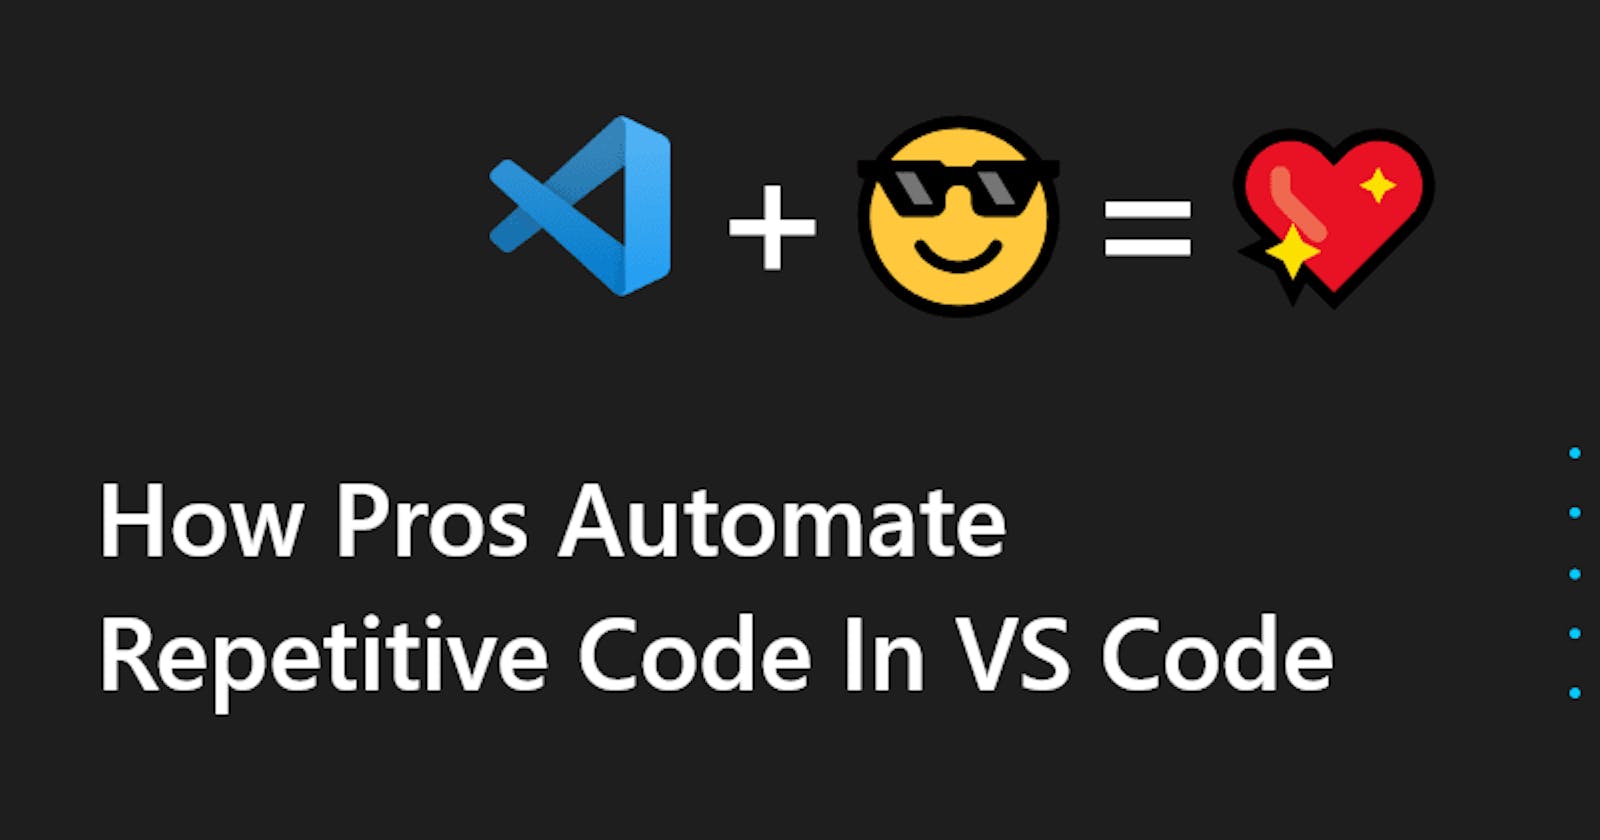 How Pros Automate Repetitive Code using VS Code